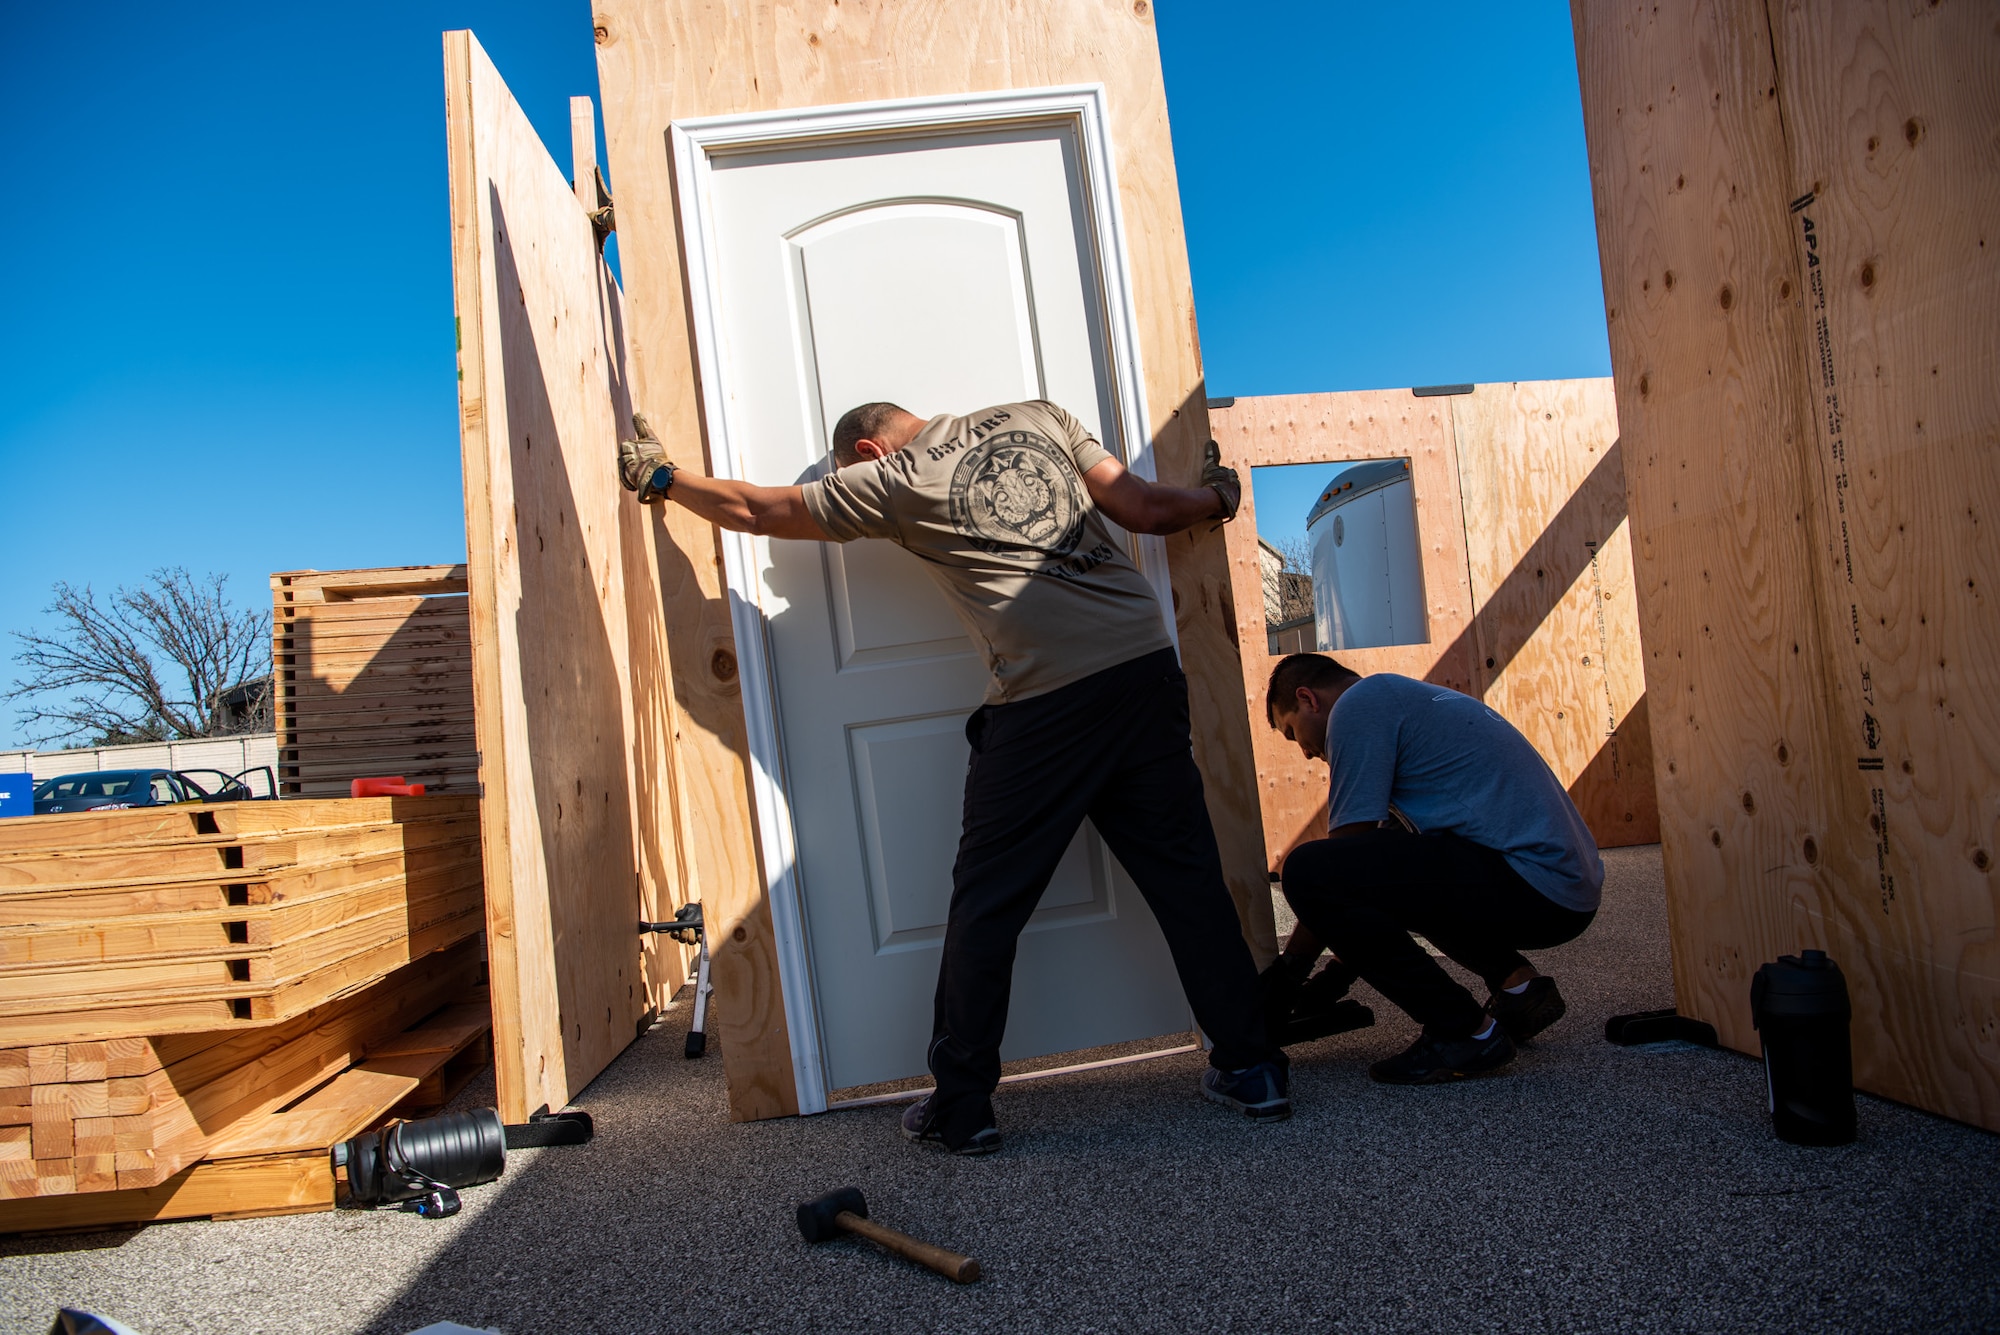 Tech. Sgt. Edwin Nieves, 837th Training Squadron, tilts a door panel, as Intendente Alexander Pacheco, 837th Training Squadron, assists with assembling  the shoot house at the Inter-American Air Forces Academy at Joint Base San Antonio-Lackland, Texas, Jan. 10, 2023. The shoot house is among the newest equipment at the academy that will be used to train international military students from partner nations. The facility consists of modular wood panels that can be easily moved and reconfigured into different layouts, ensuring students remain challenged. (U.S. Air Force photo by Vanessa R. Adame)